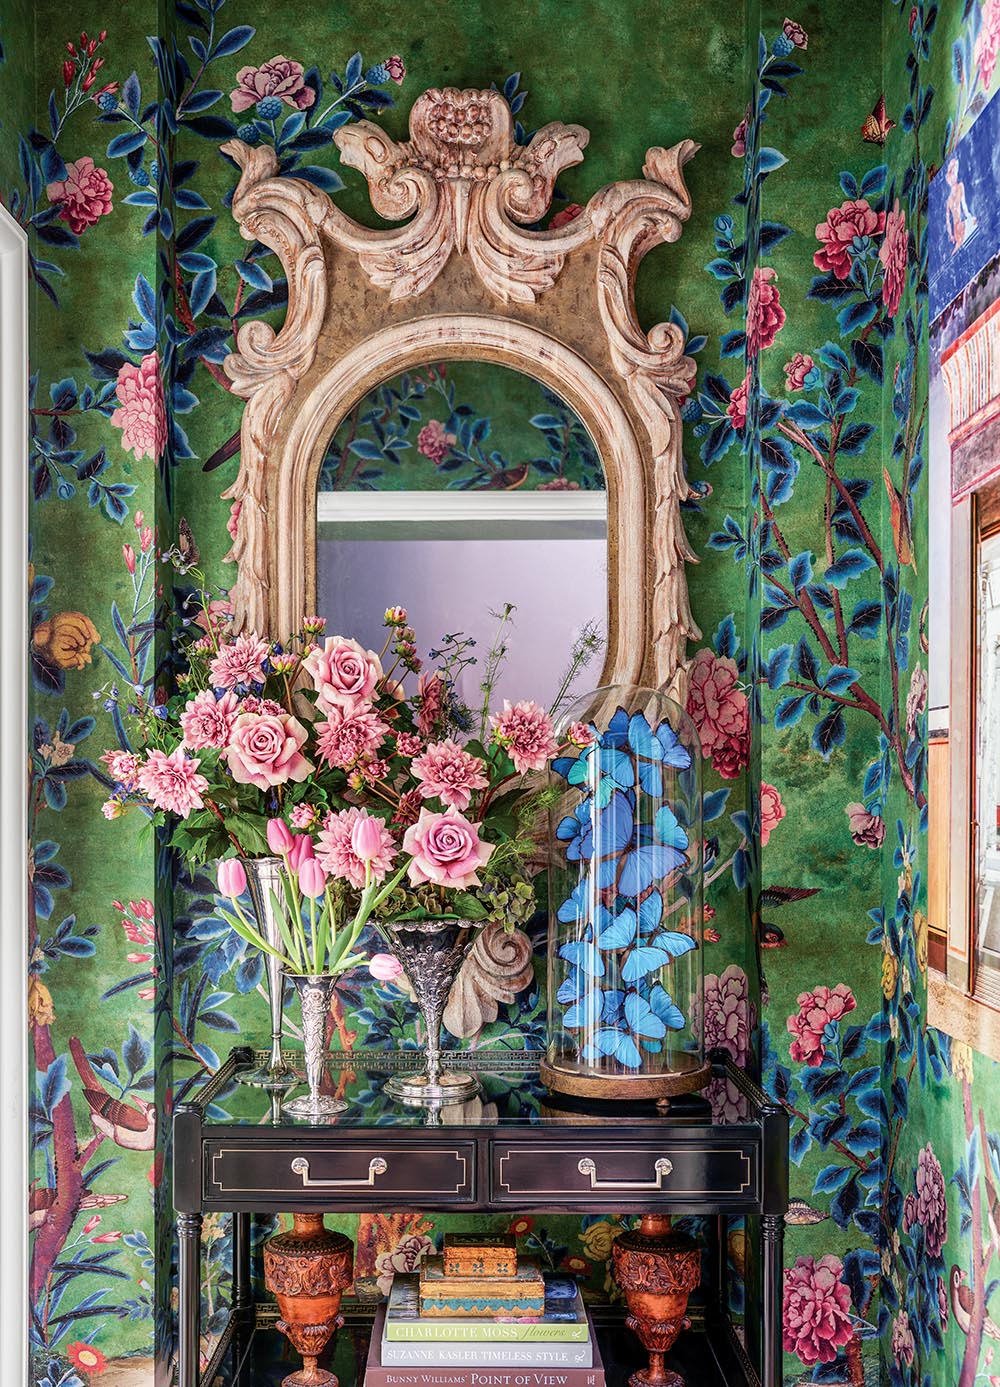 Bedroom vestibule with table topped with silver vases of pink roses and a cloche of blue butterflies.